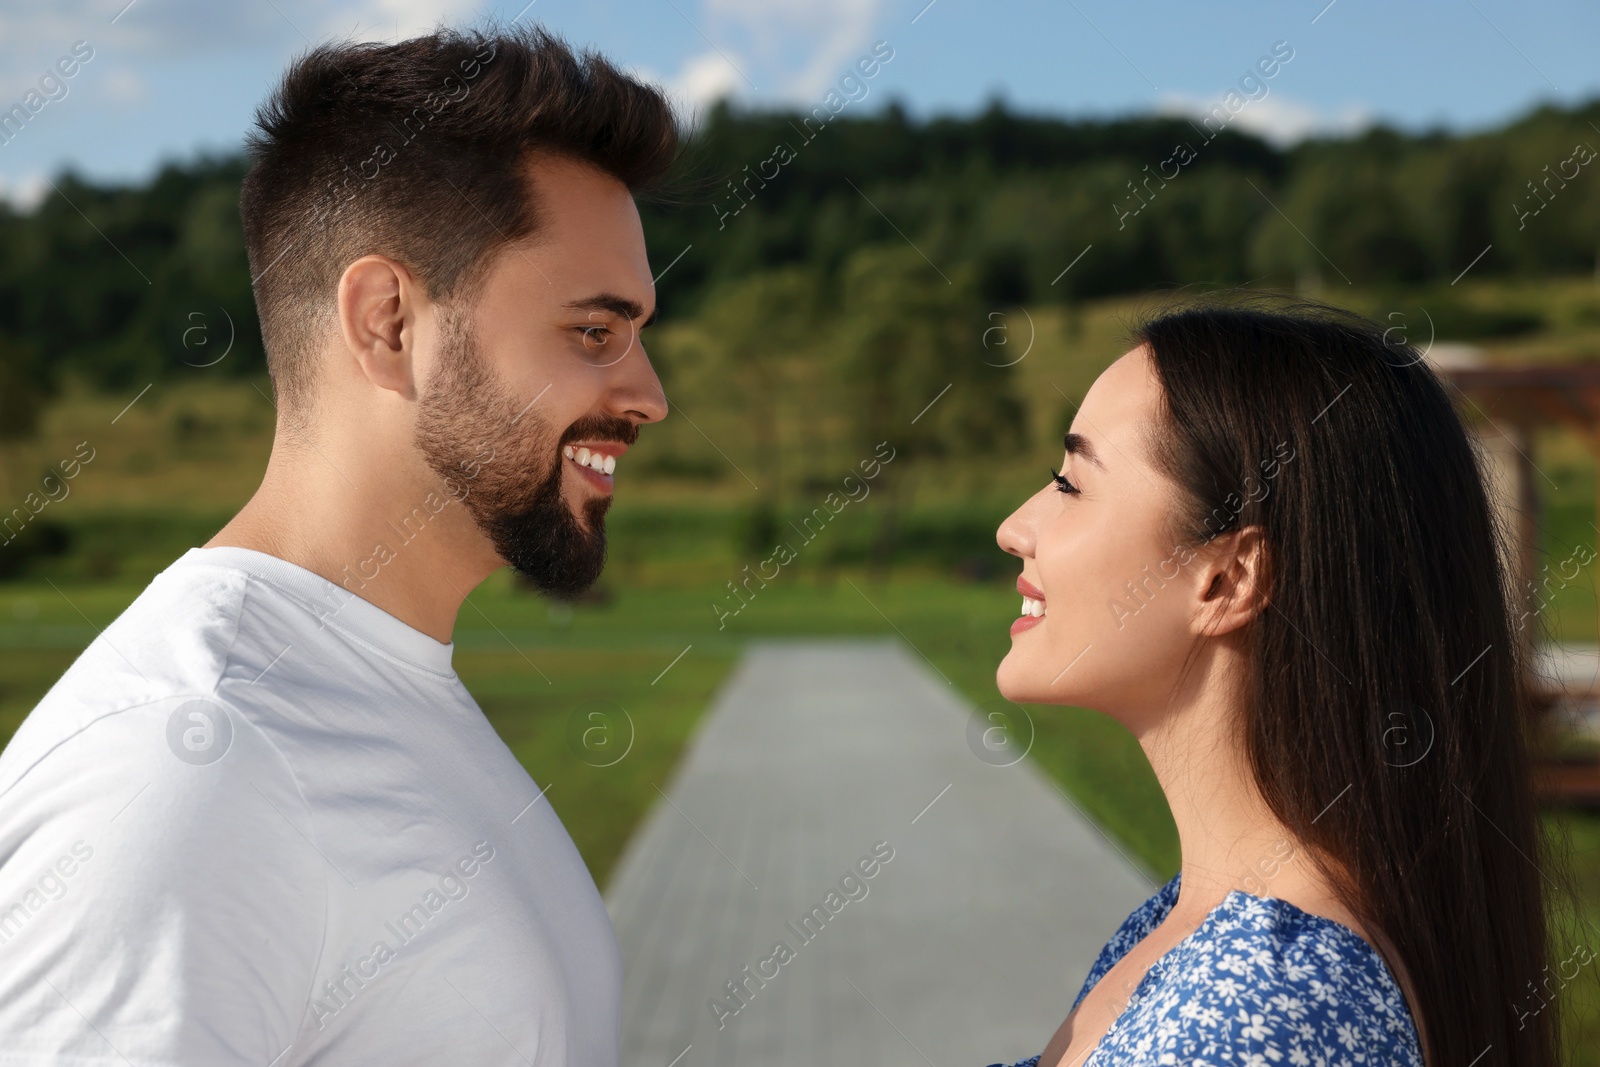 Photo of Romantic date. Beautiful couple spending time together outdoors